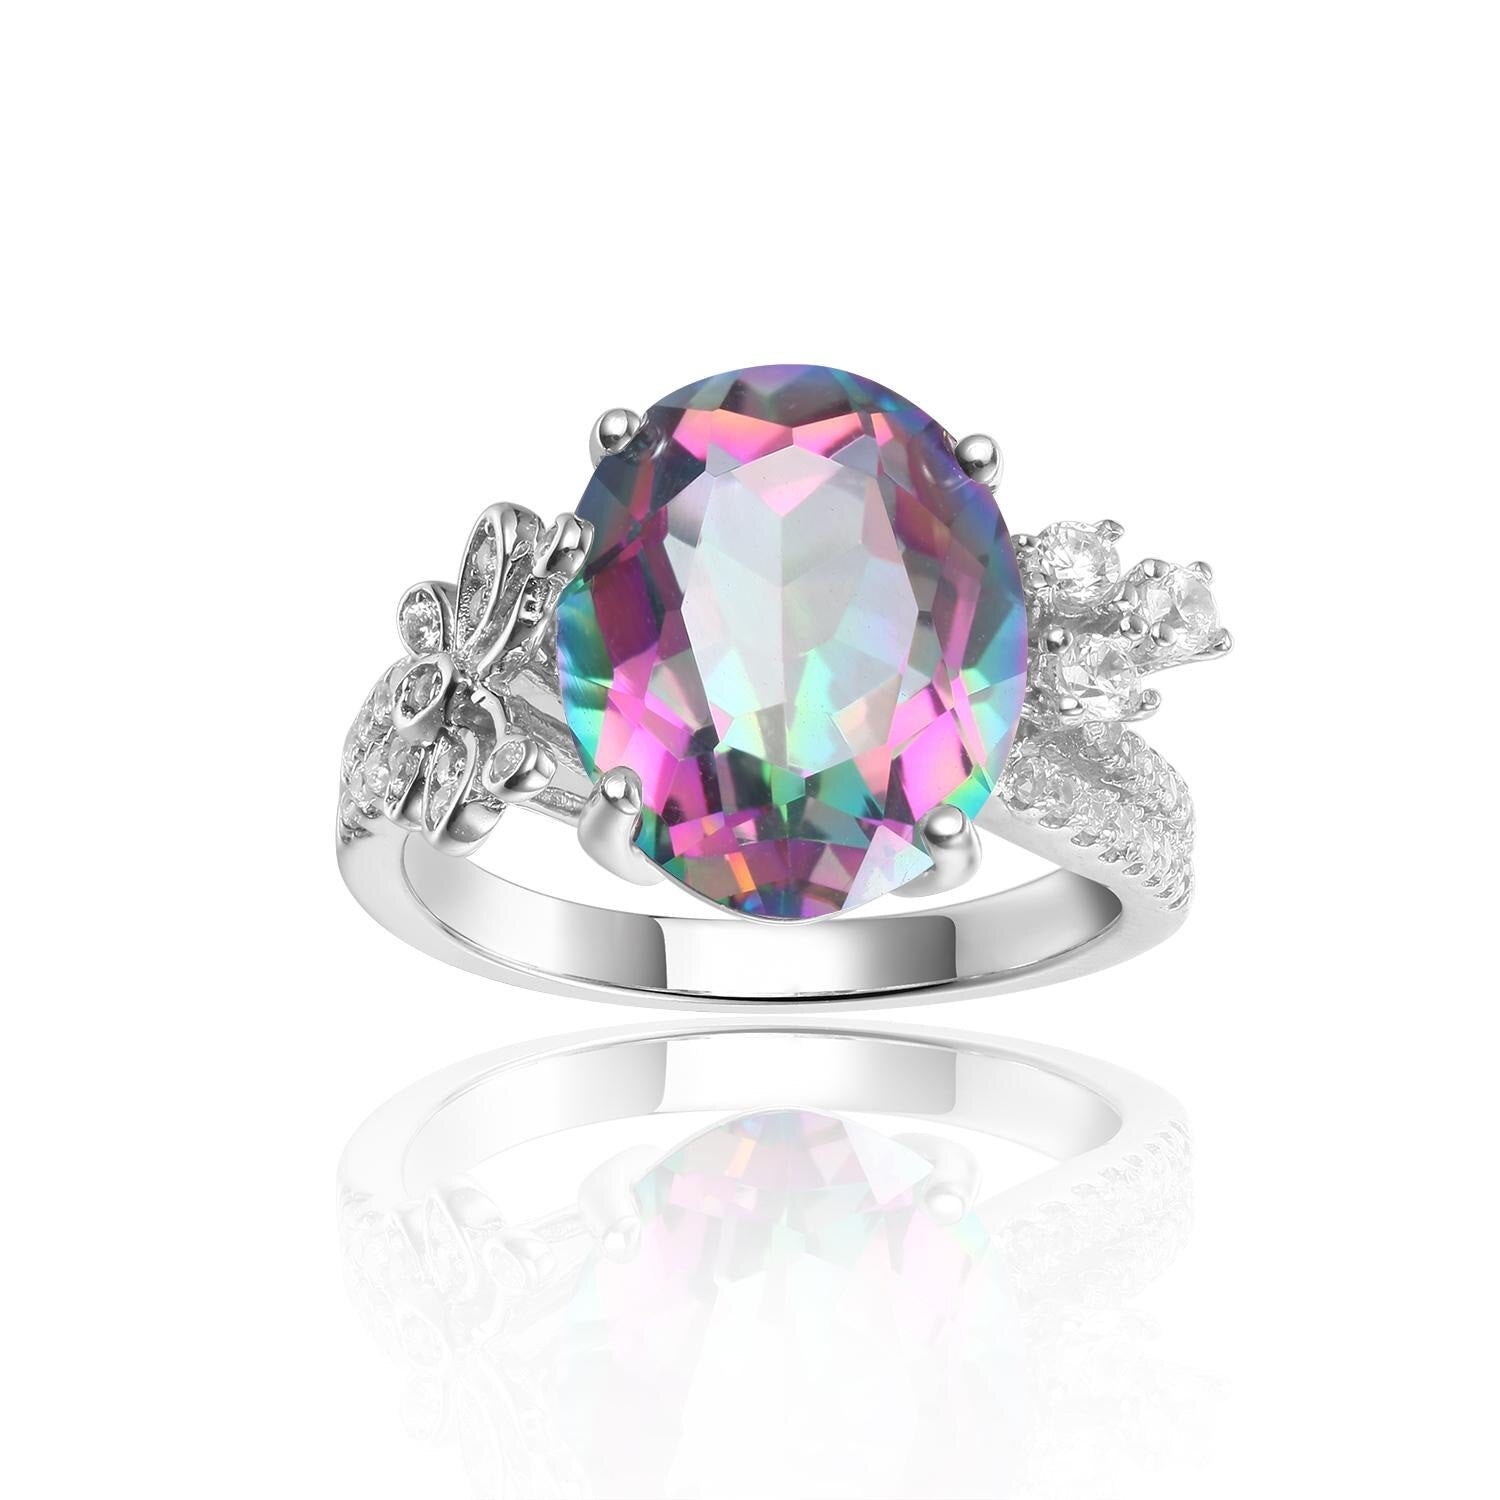 GEM&#39;S BALLET 4.36Ct 10x12mm Rainbow Mystic Topaz Gemstone Antique Art Rings in Sterling Silver with Laurel Leaves Gift For Her Rainbow|925 Sterling Silver